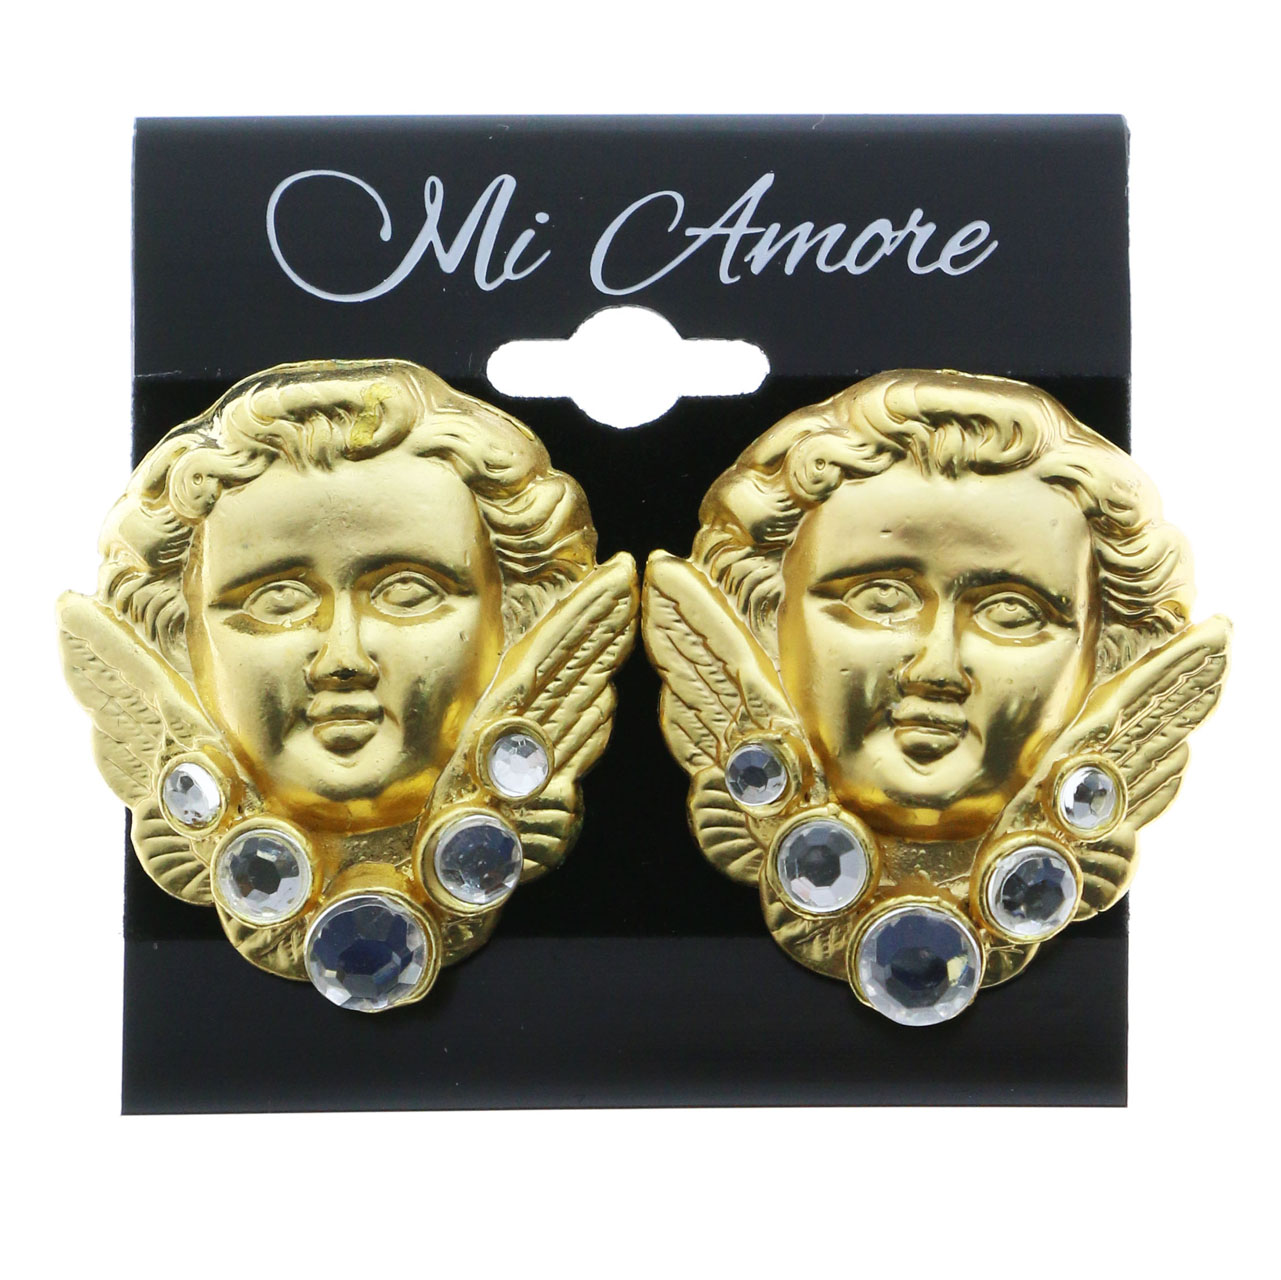 Mi Amore Crystal Accents Cherub Clip-On-Earrings Gold-Tone - image 2 of 2